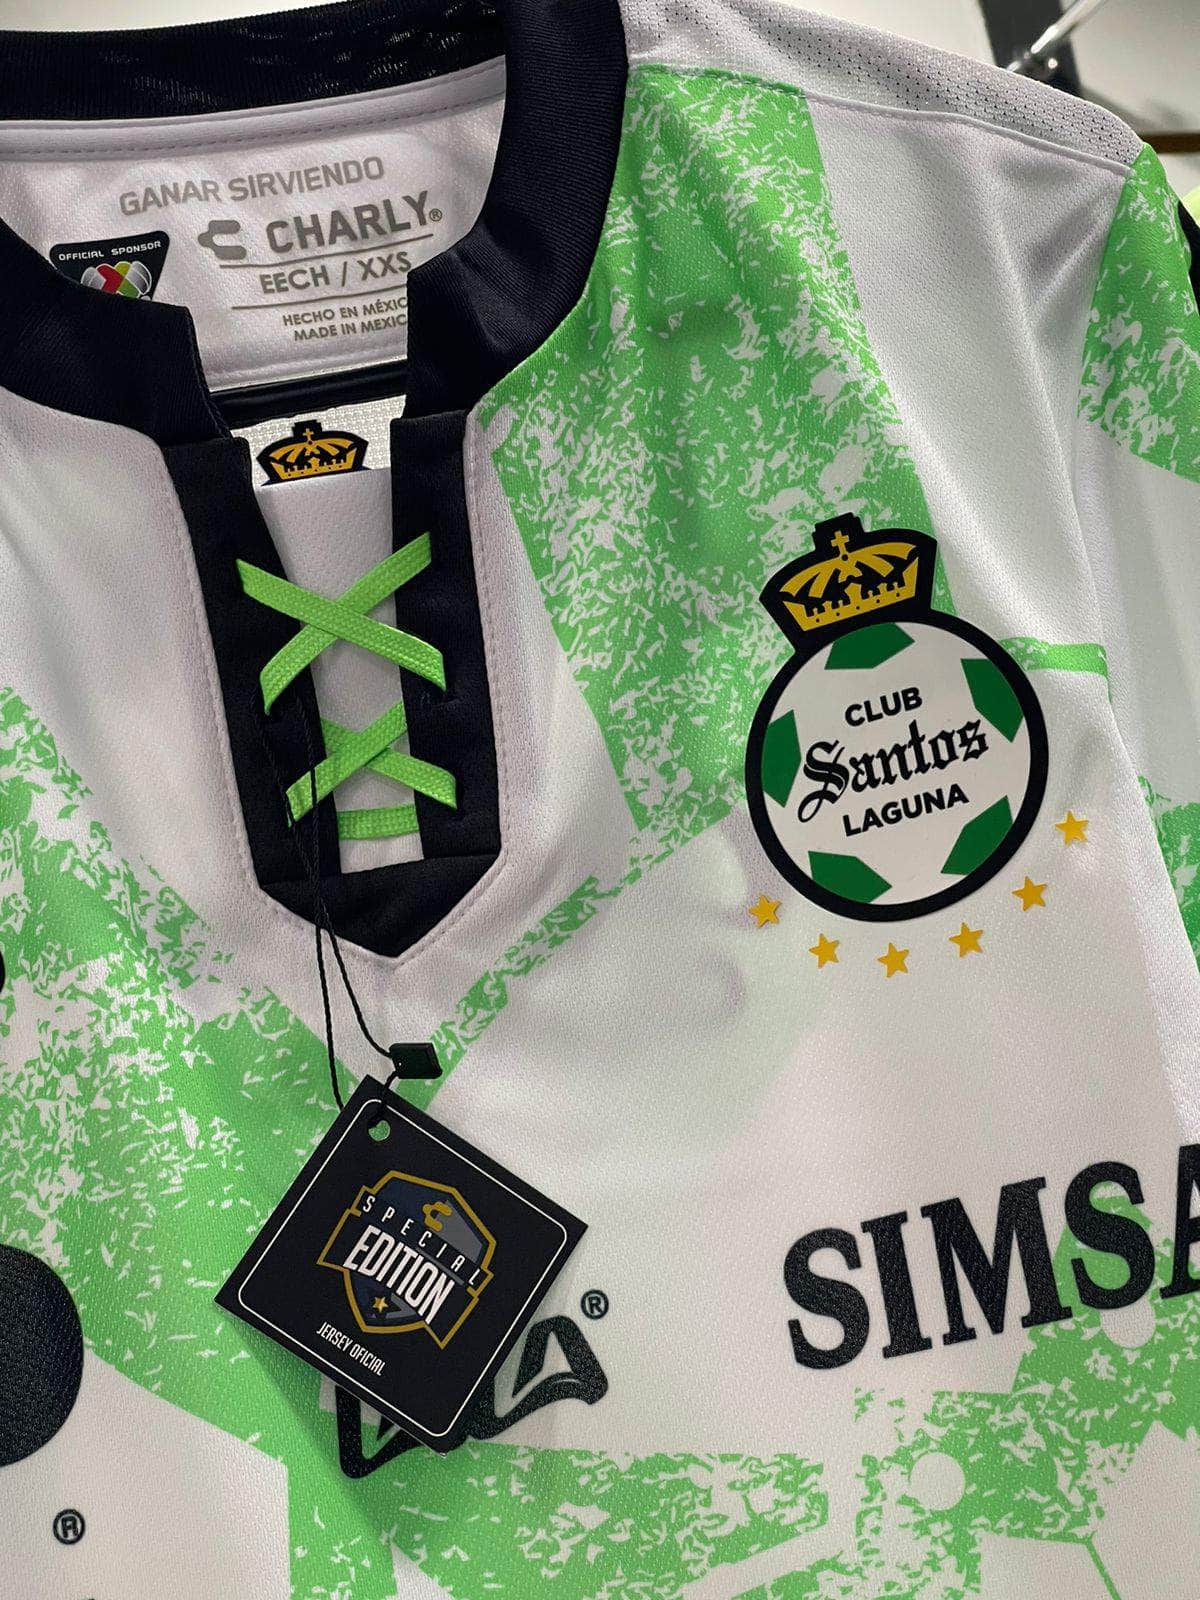 Charly Jersey XXS Jersey Santos Laguna X Lucha Libre AAA Special Edition 5019240103113 5019240.0